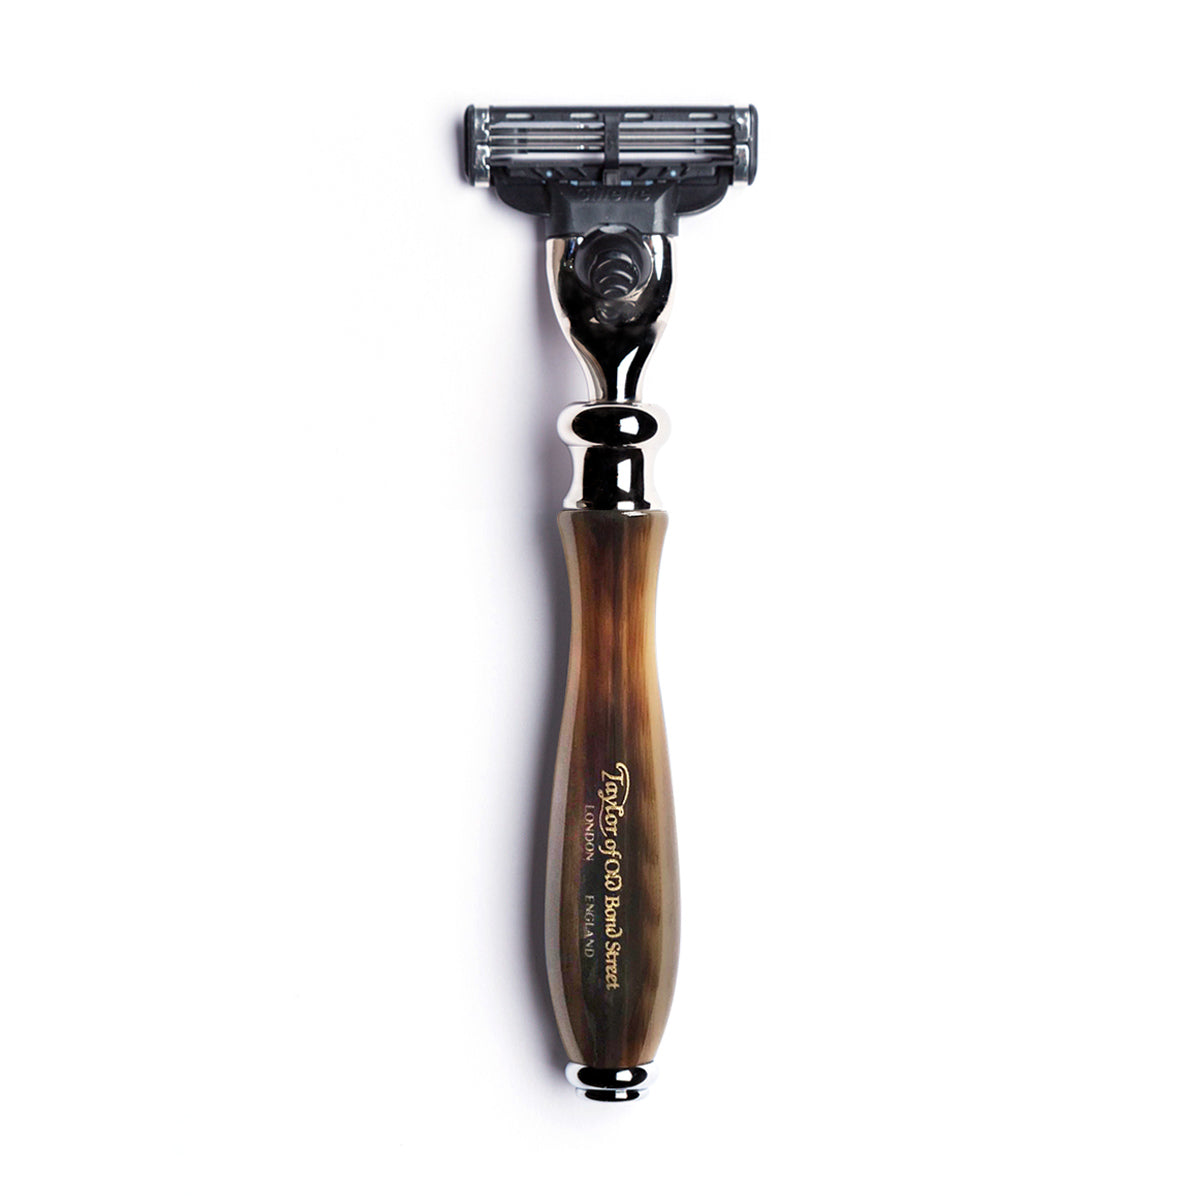 Victorian Mach3 Razor with Faux Horn Handle